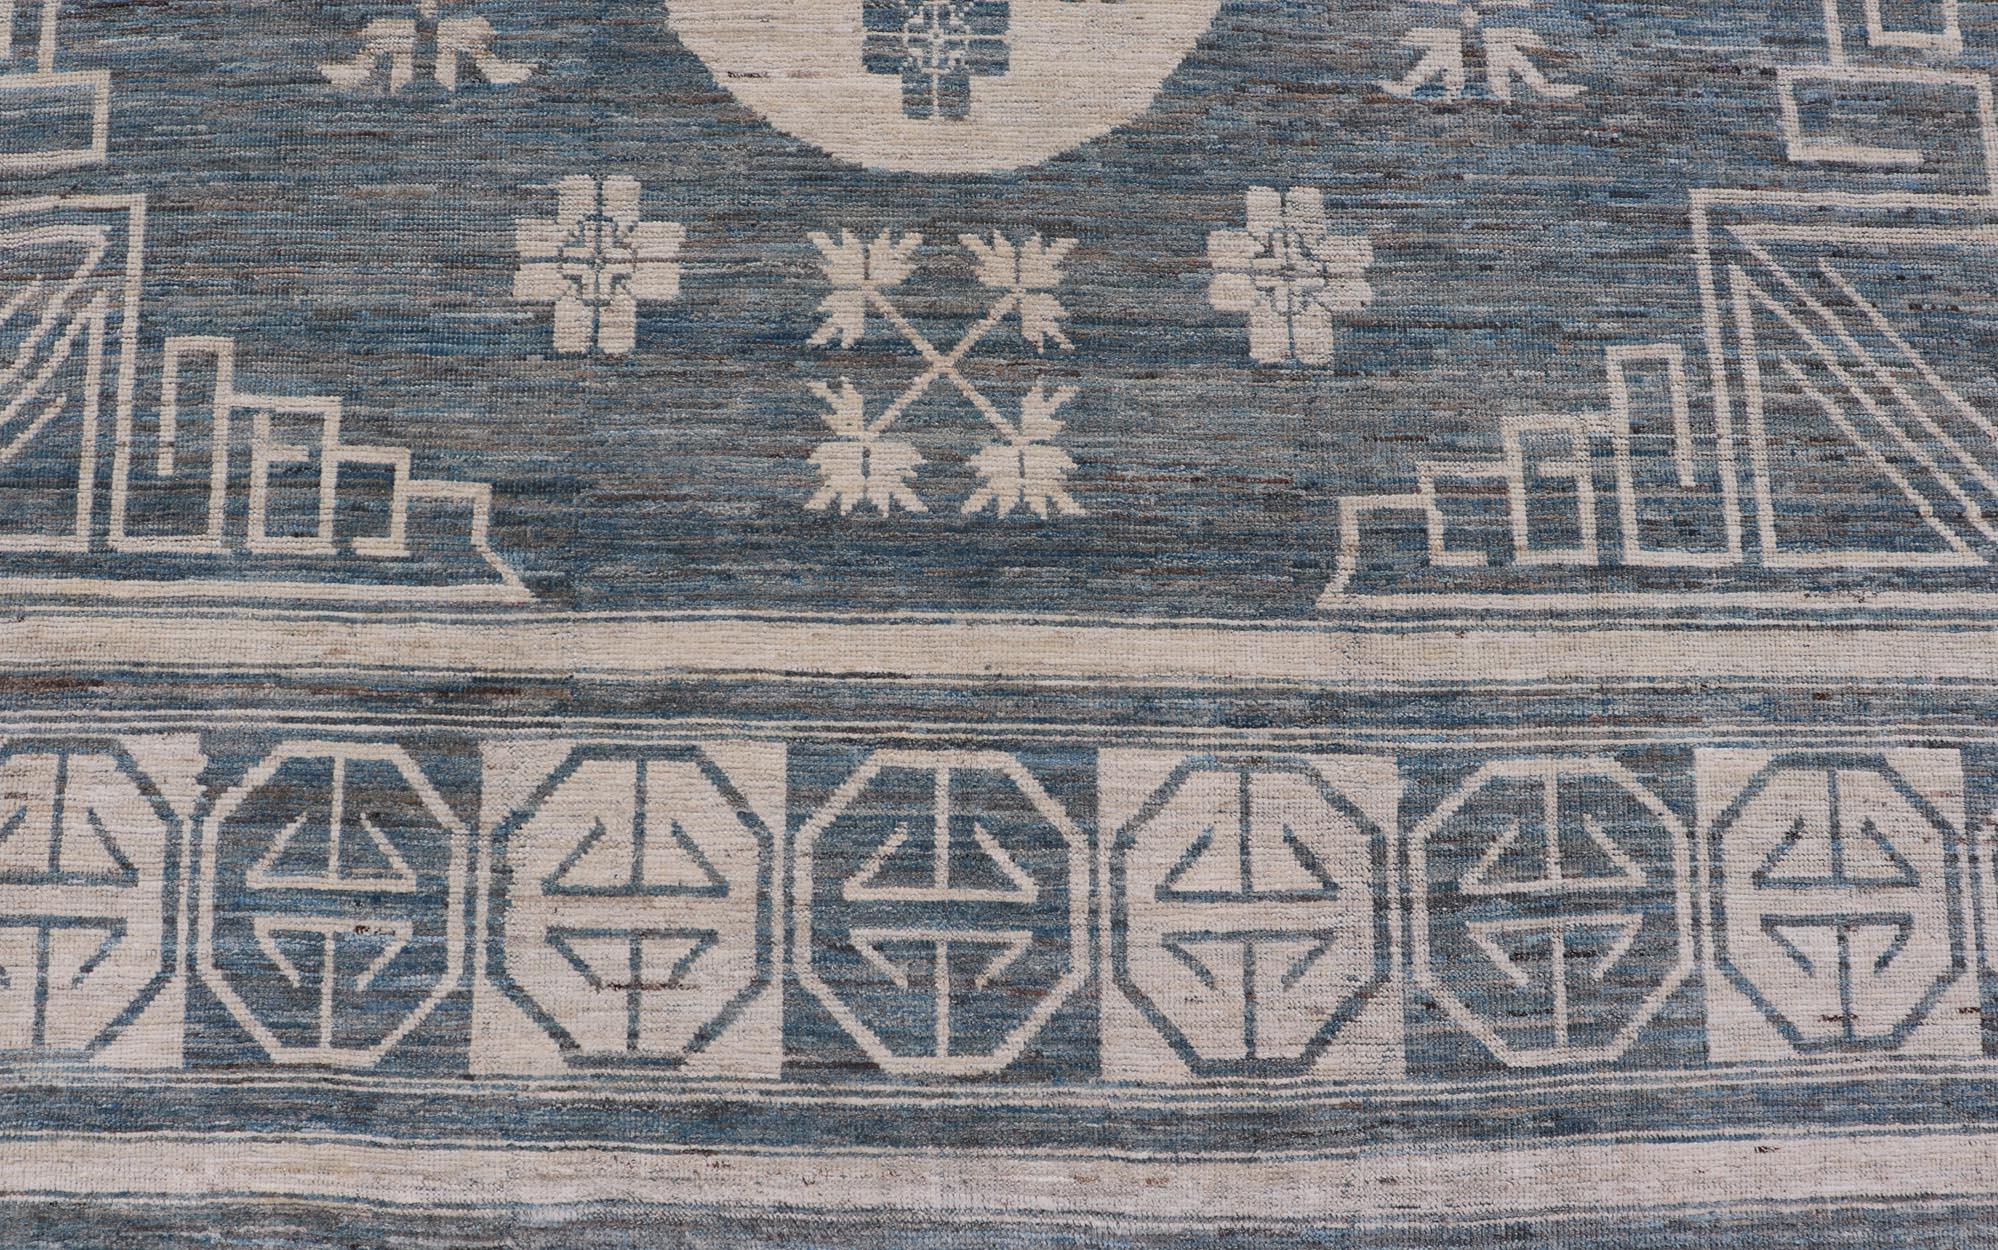 Modern Khotan Rug with Circular Medallions in Shades of Steel Blue & off White For Sale 1